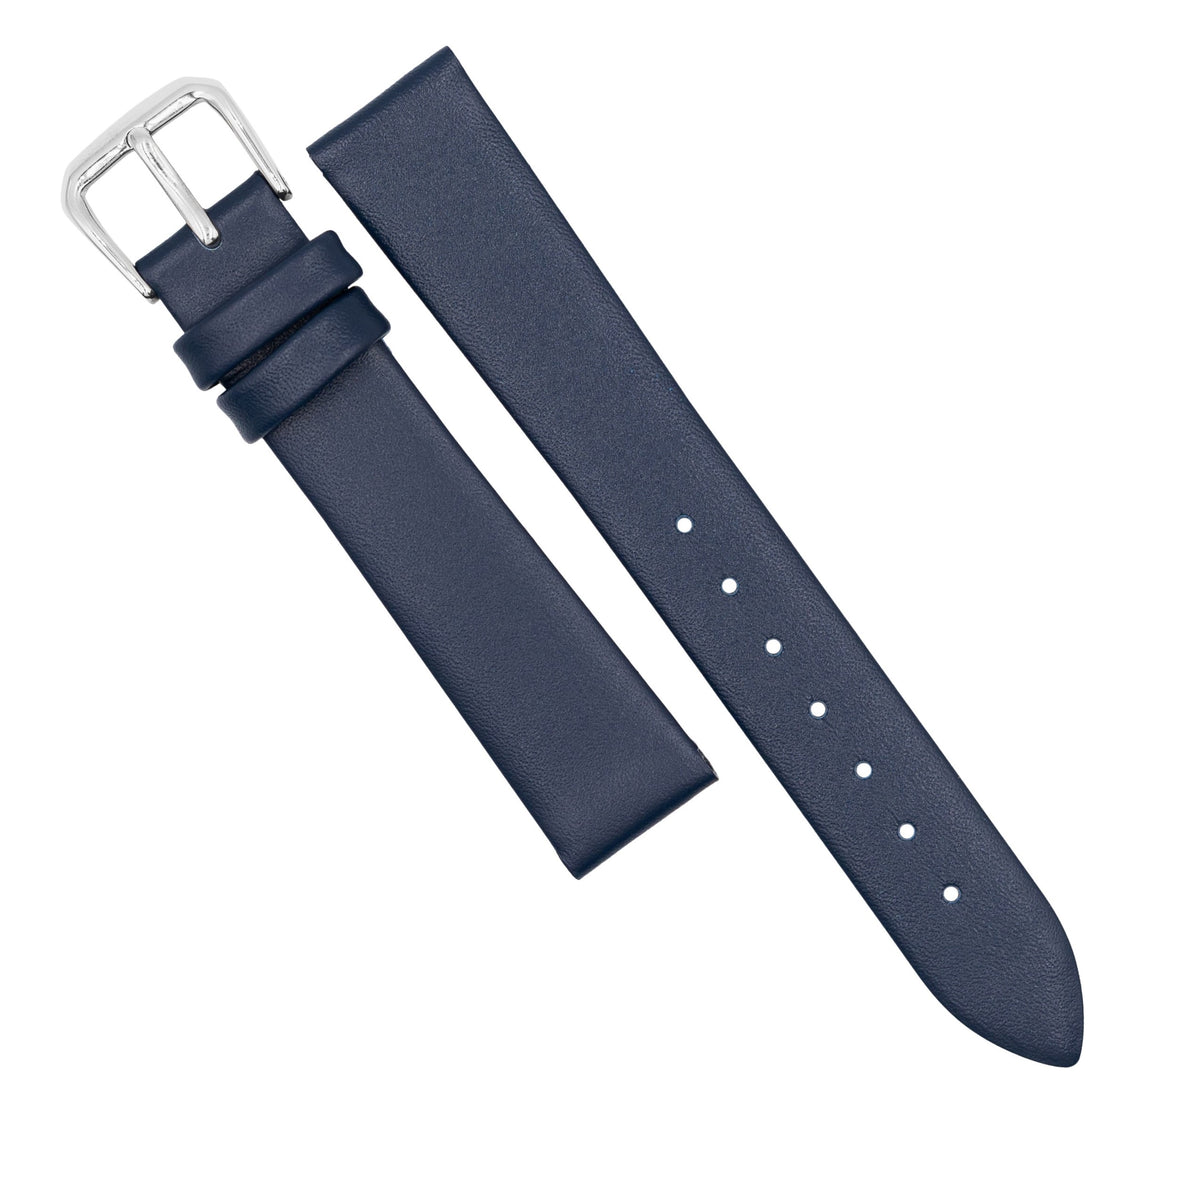 Unstitched Smooth Leather Watch Strap in Navy (12mm) - Nomad Watch Works SG